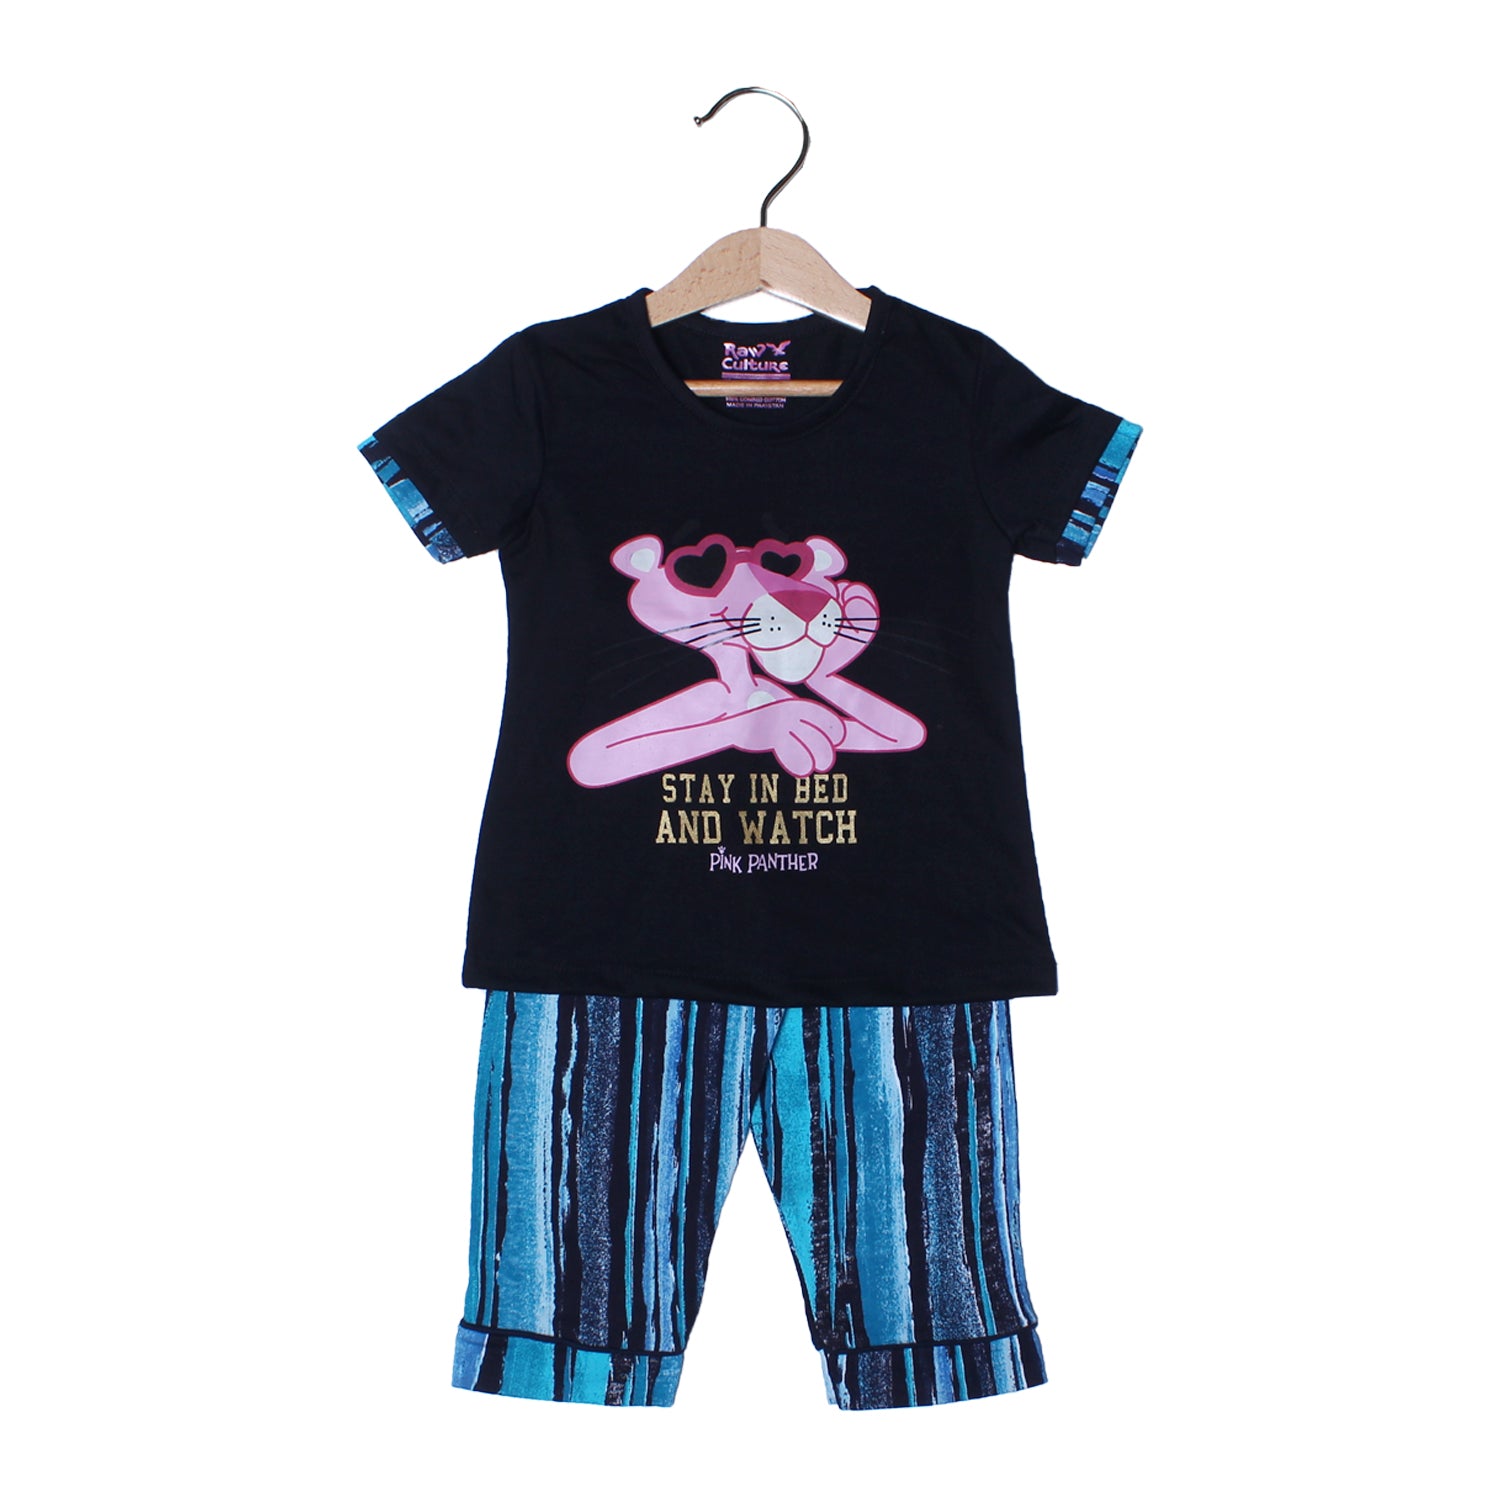 NEW BLACK WITH BLUE TROUSER PINK PANTHER PRINTED SUIT